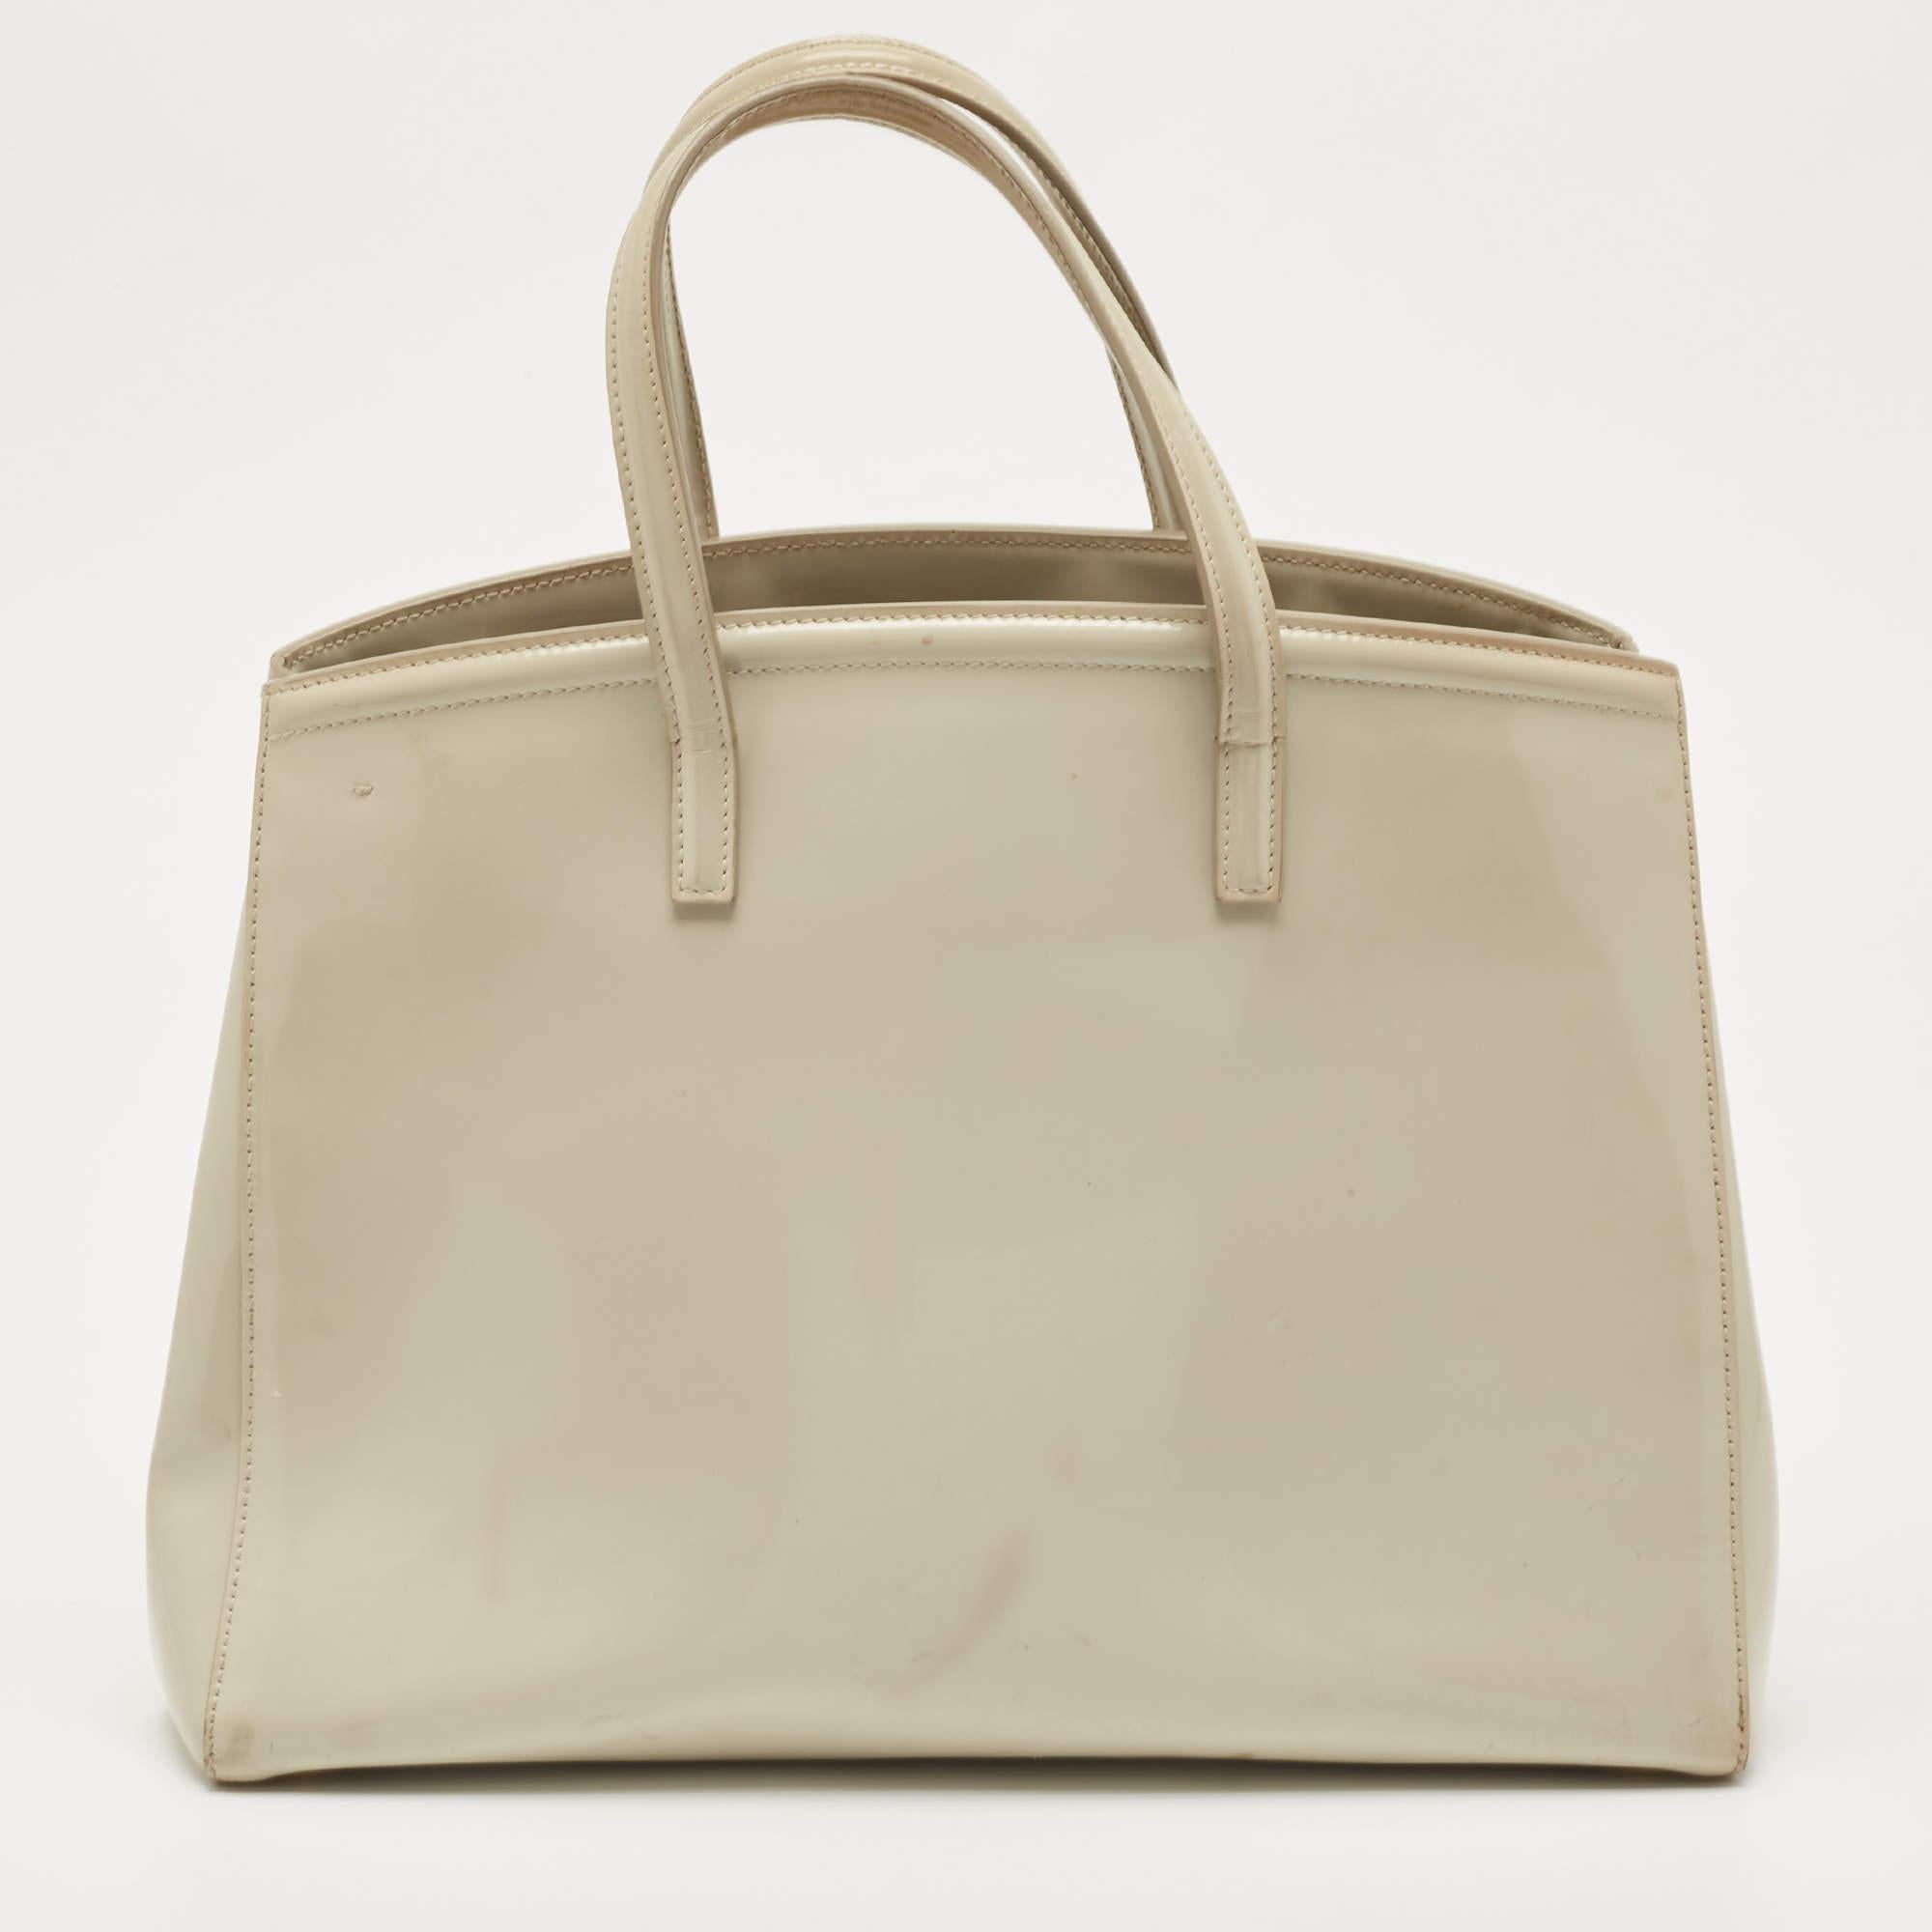 Thoughtful details, high quality, and everyday convenience mark this tote for women by Prada. The bag is sewn with skill to deliver a refined look and an impeccable finish.

